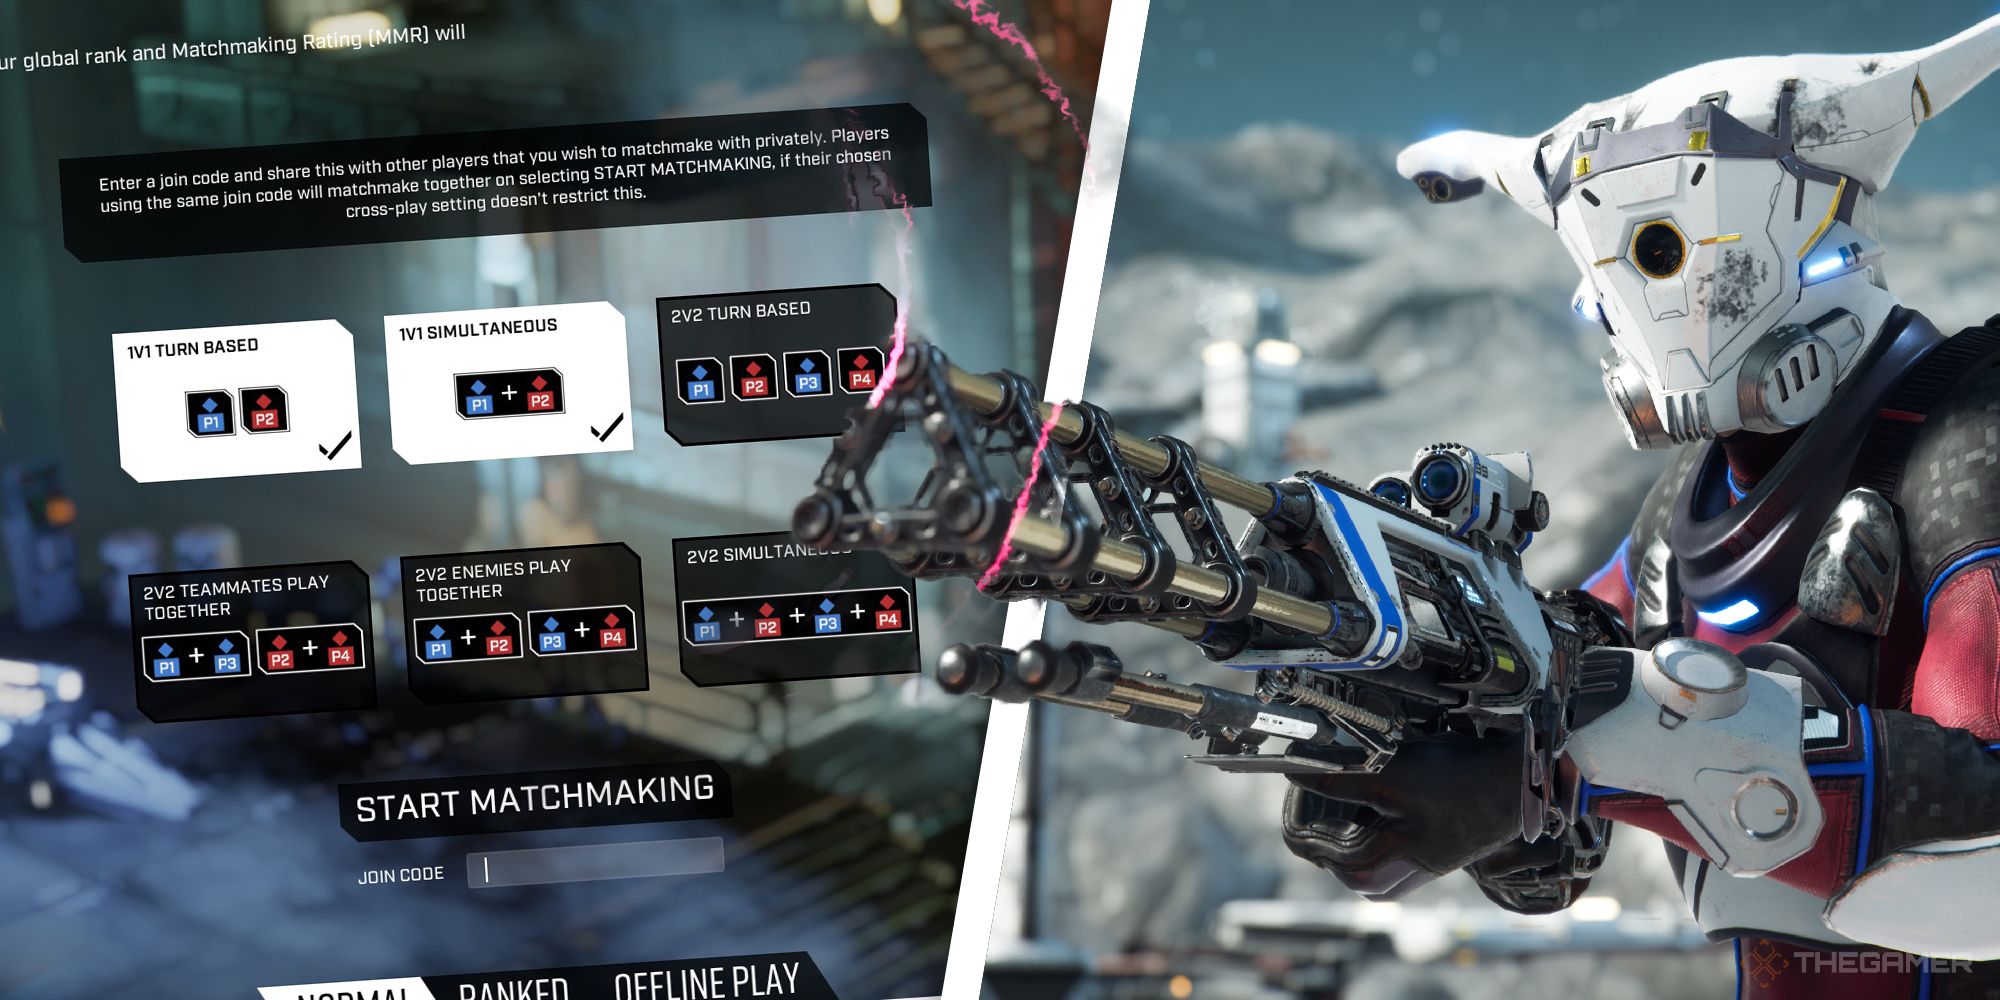 a split image of the matchmaking screen and either karl or the sniper character